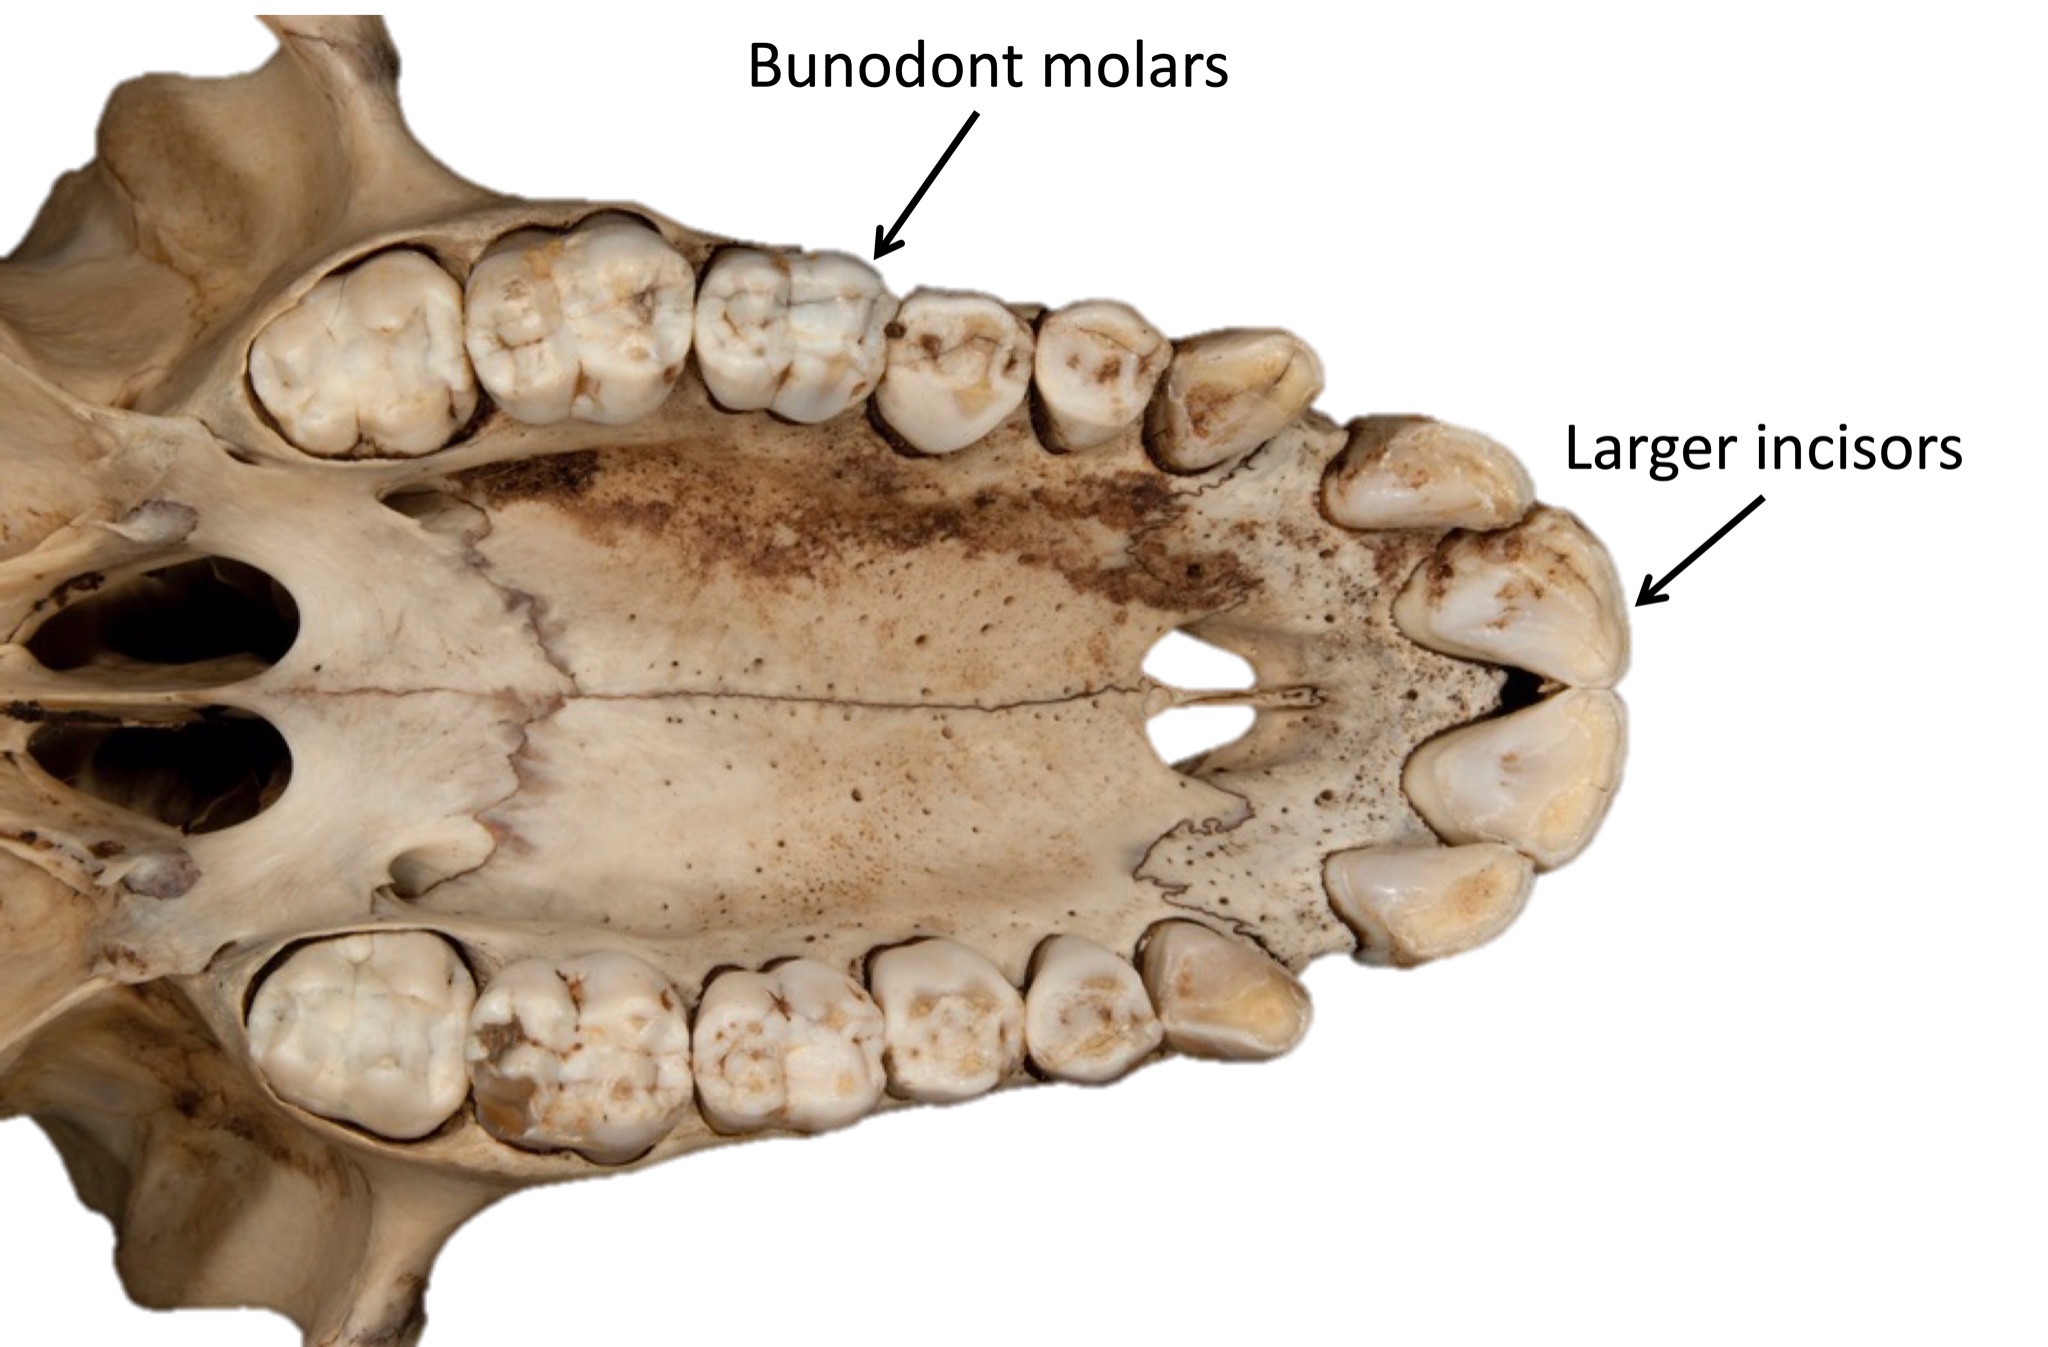 Upper teeth and maxilla of a frugivore monkey.